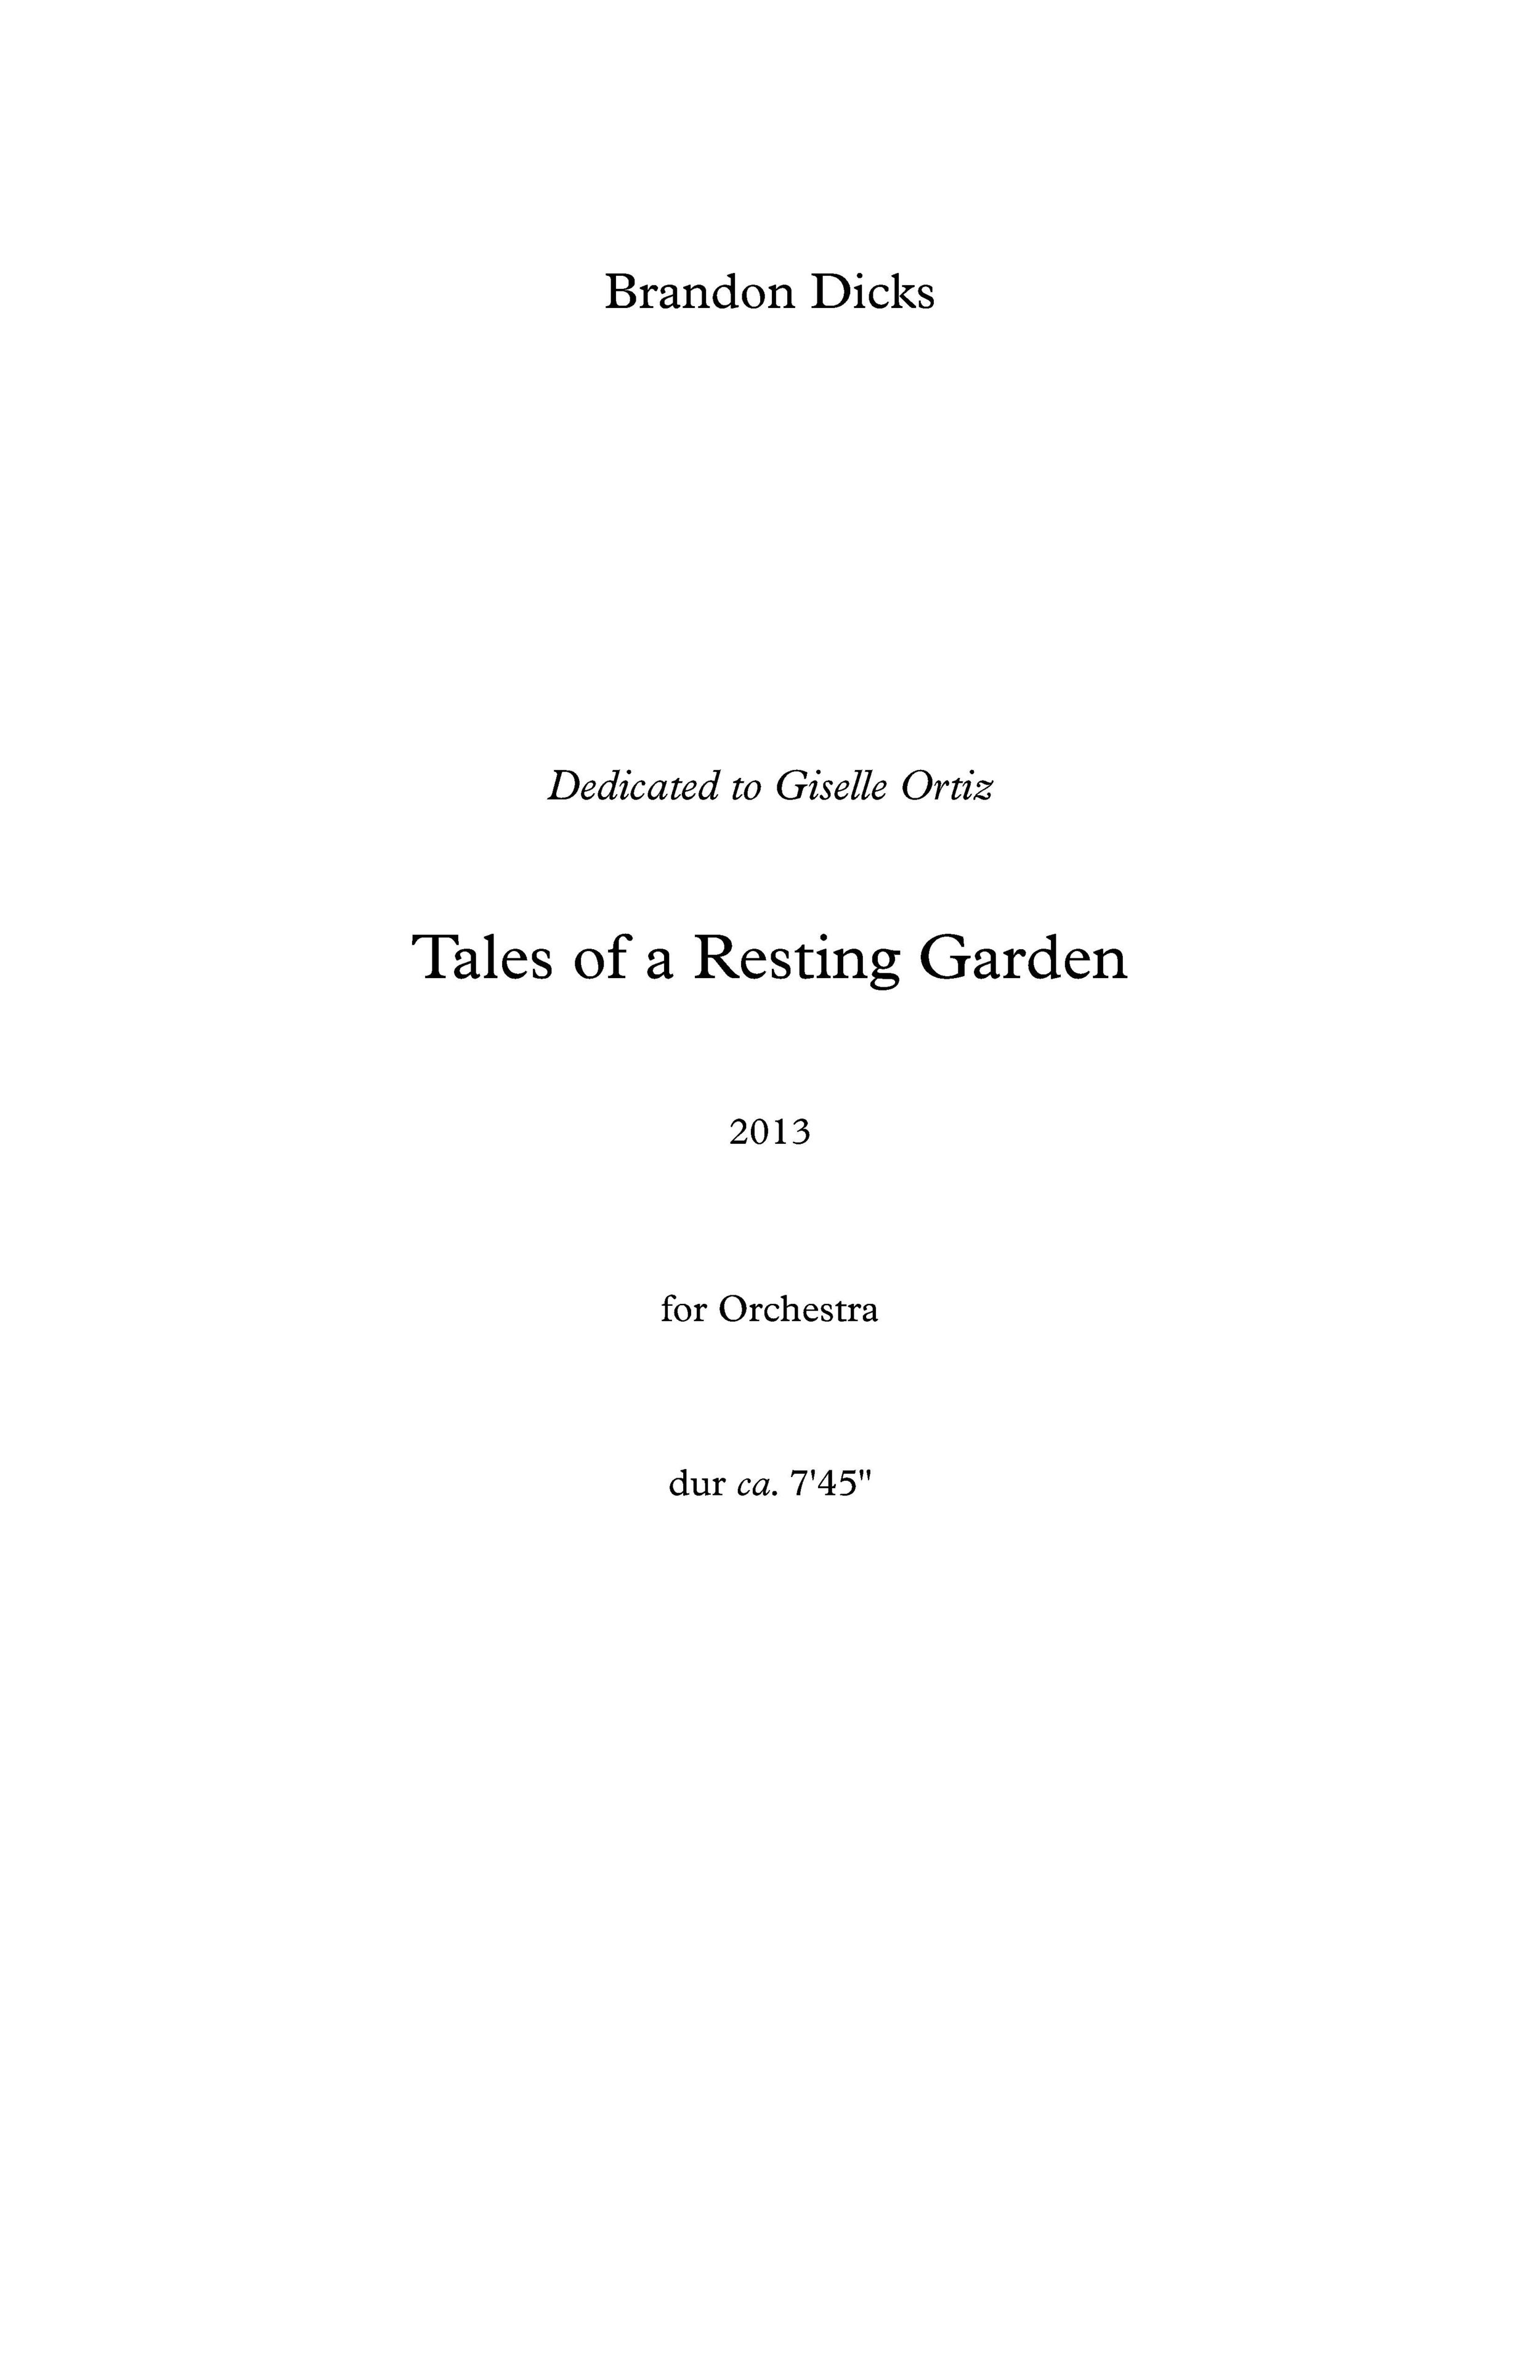 Tales of a Resting Garden (copy)_page_01.jpg